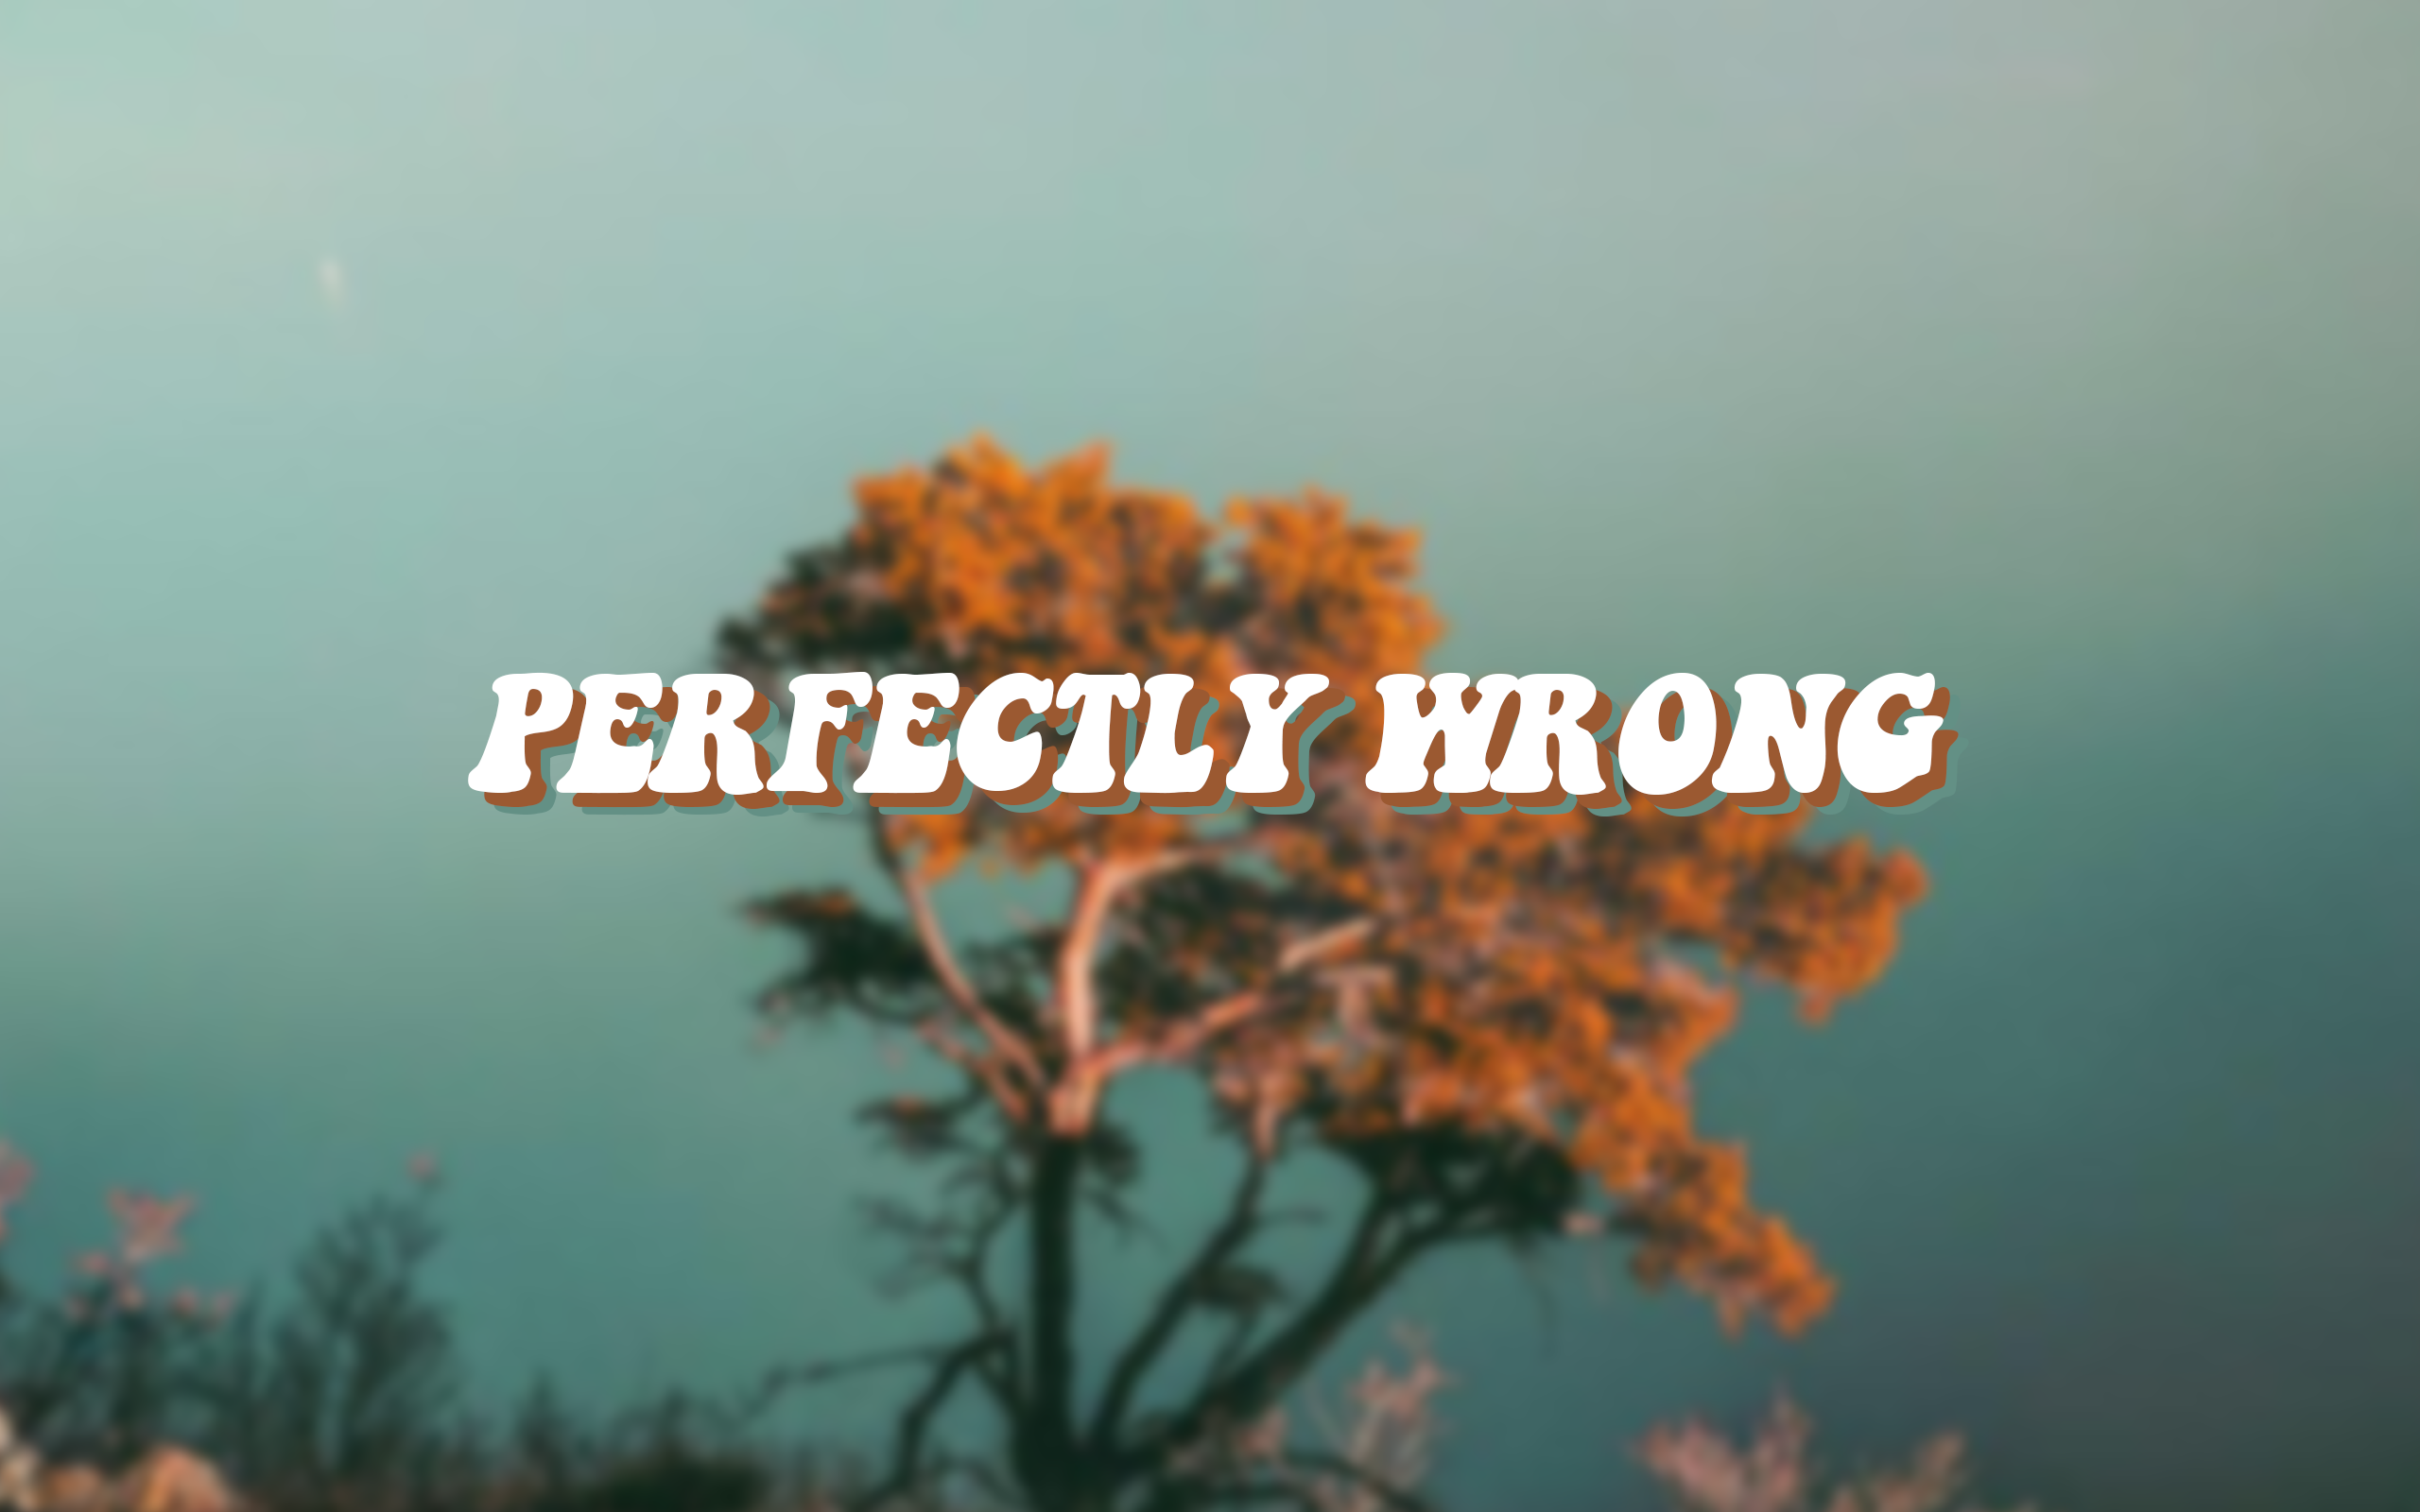 perfectly wrong wallpaper -I actually used a